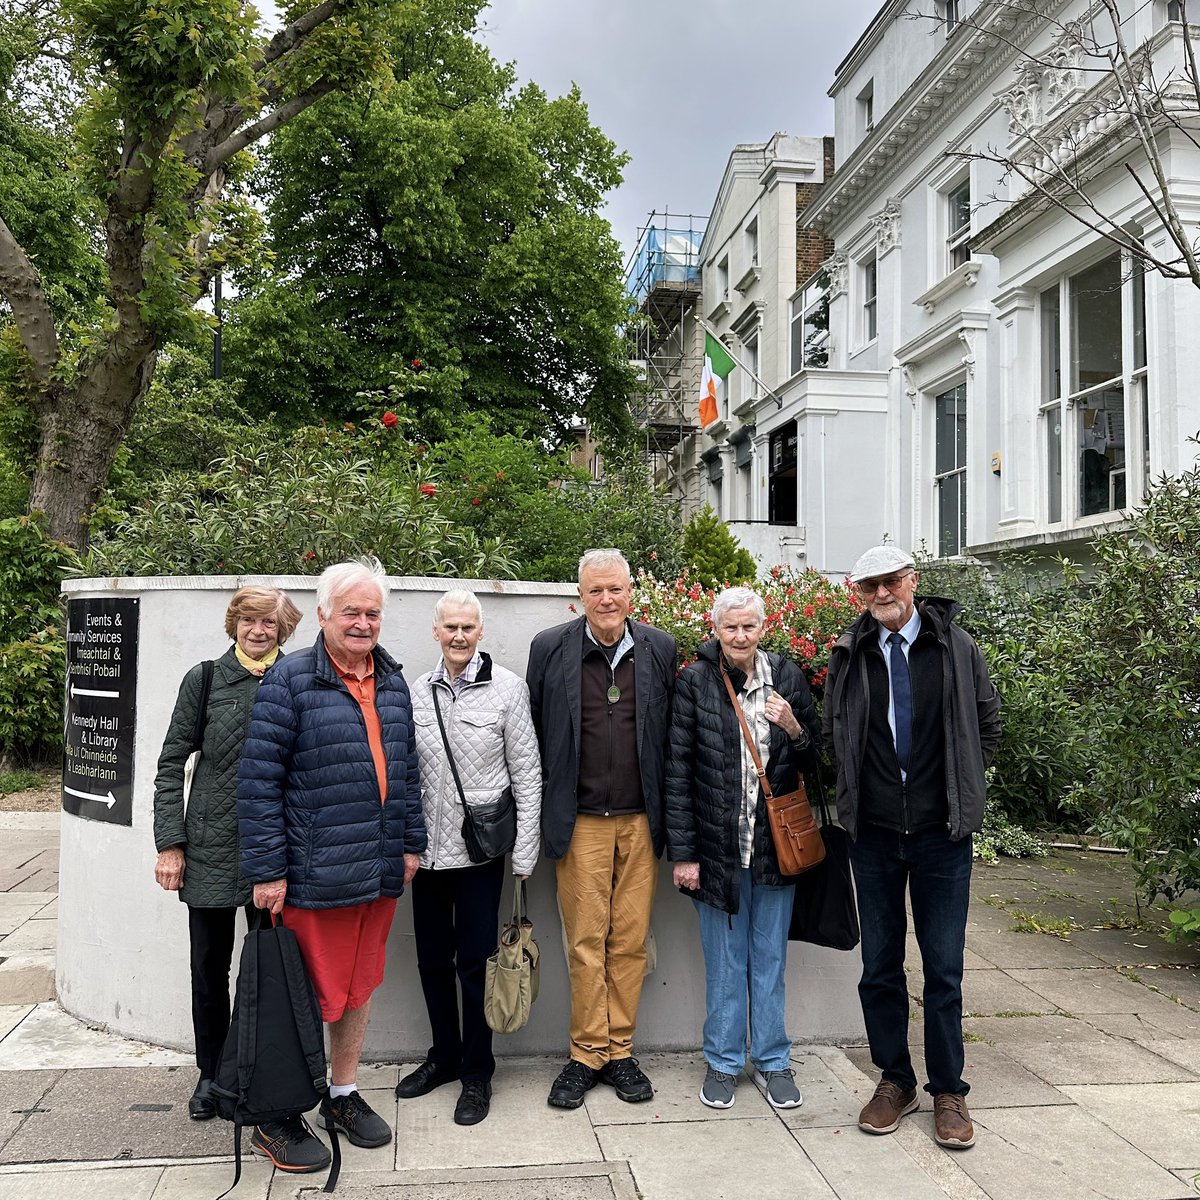 It’s #MentalHealthAwarenessWeek! This year’s theme is movement, and here are today’s group setting off on one of our free guided community walks. 💚 These tours take place on the second Tuesday of each month. Call or email us to sign up!